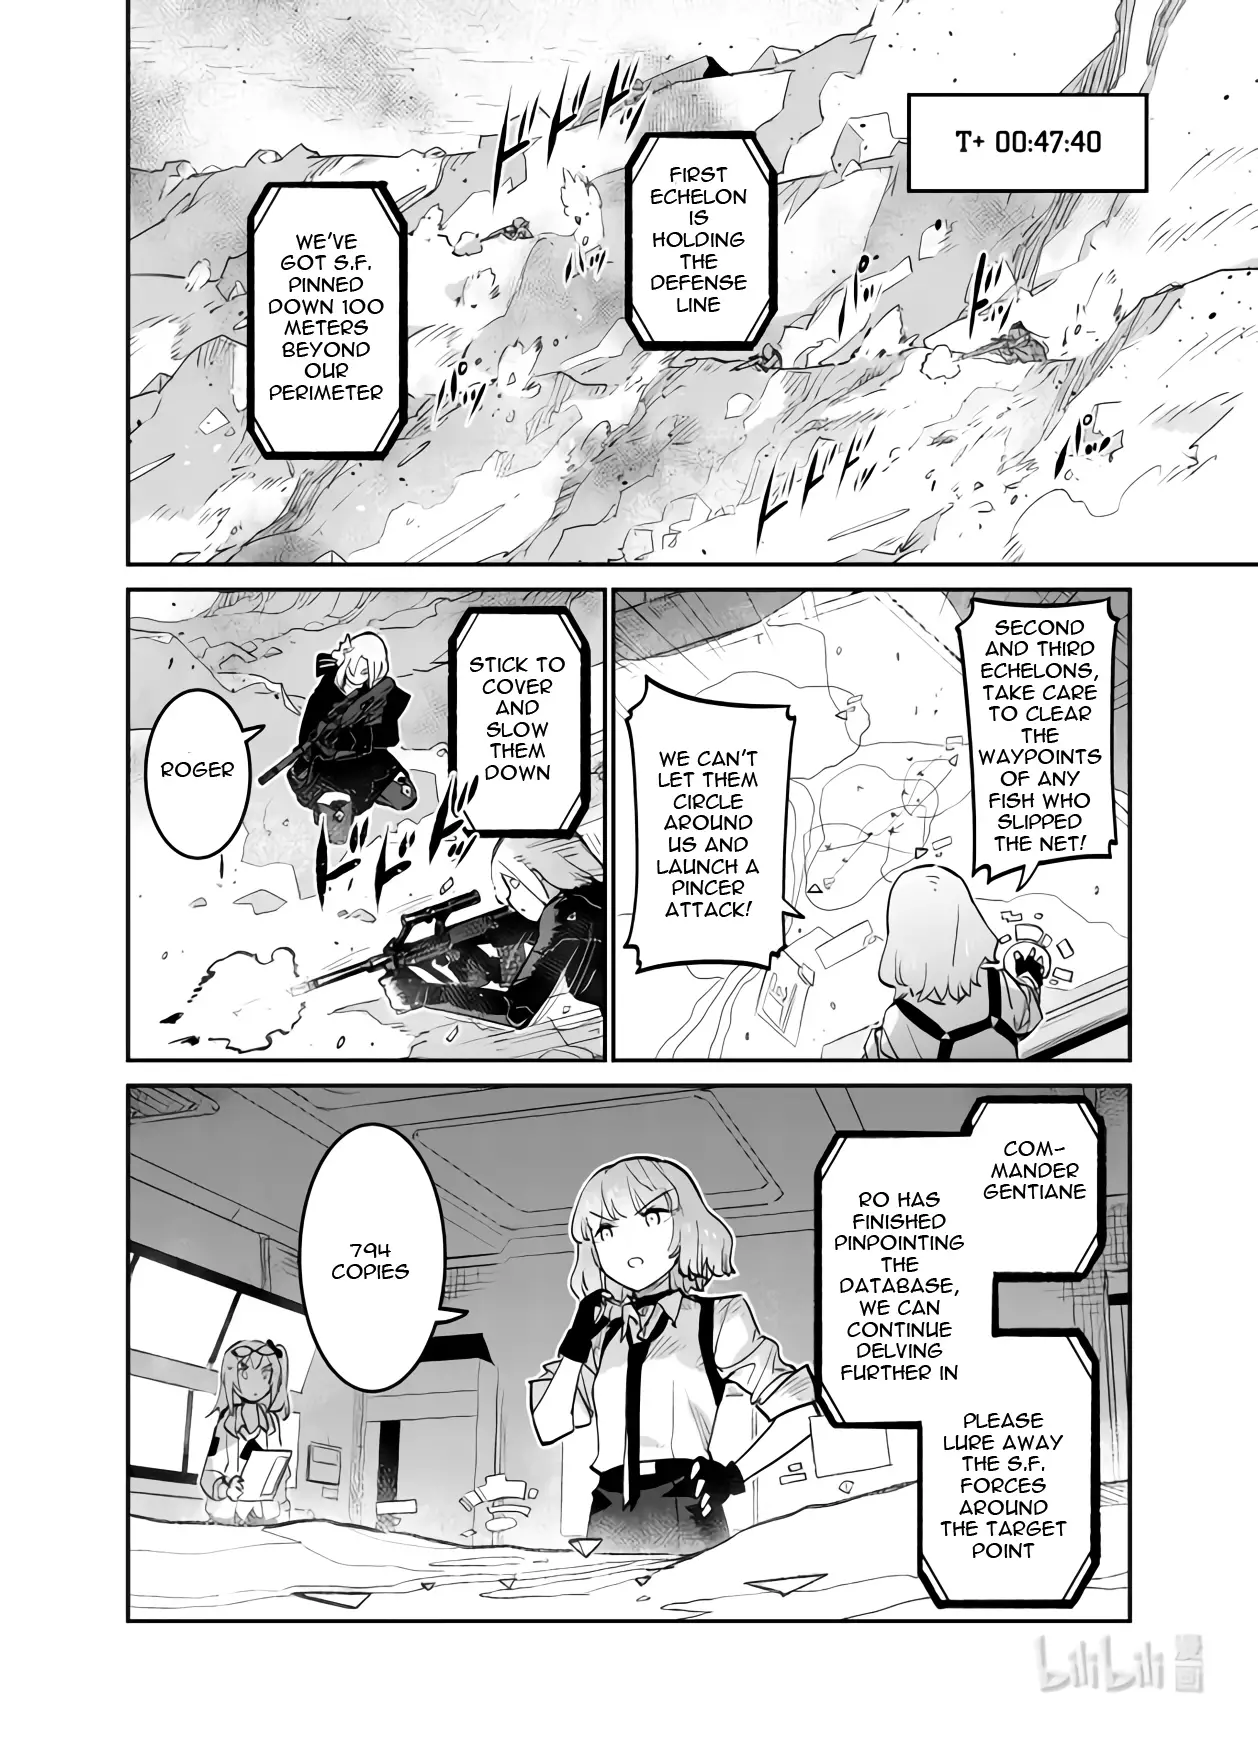 Girls' Frontline - 30 page 13-a9ac86c8